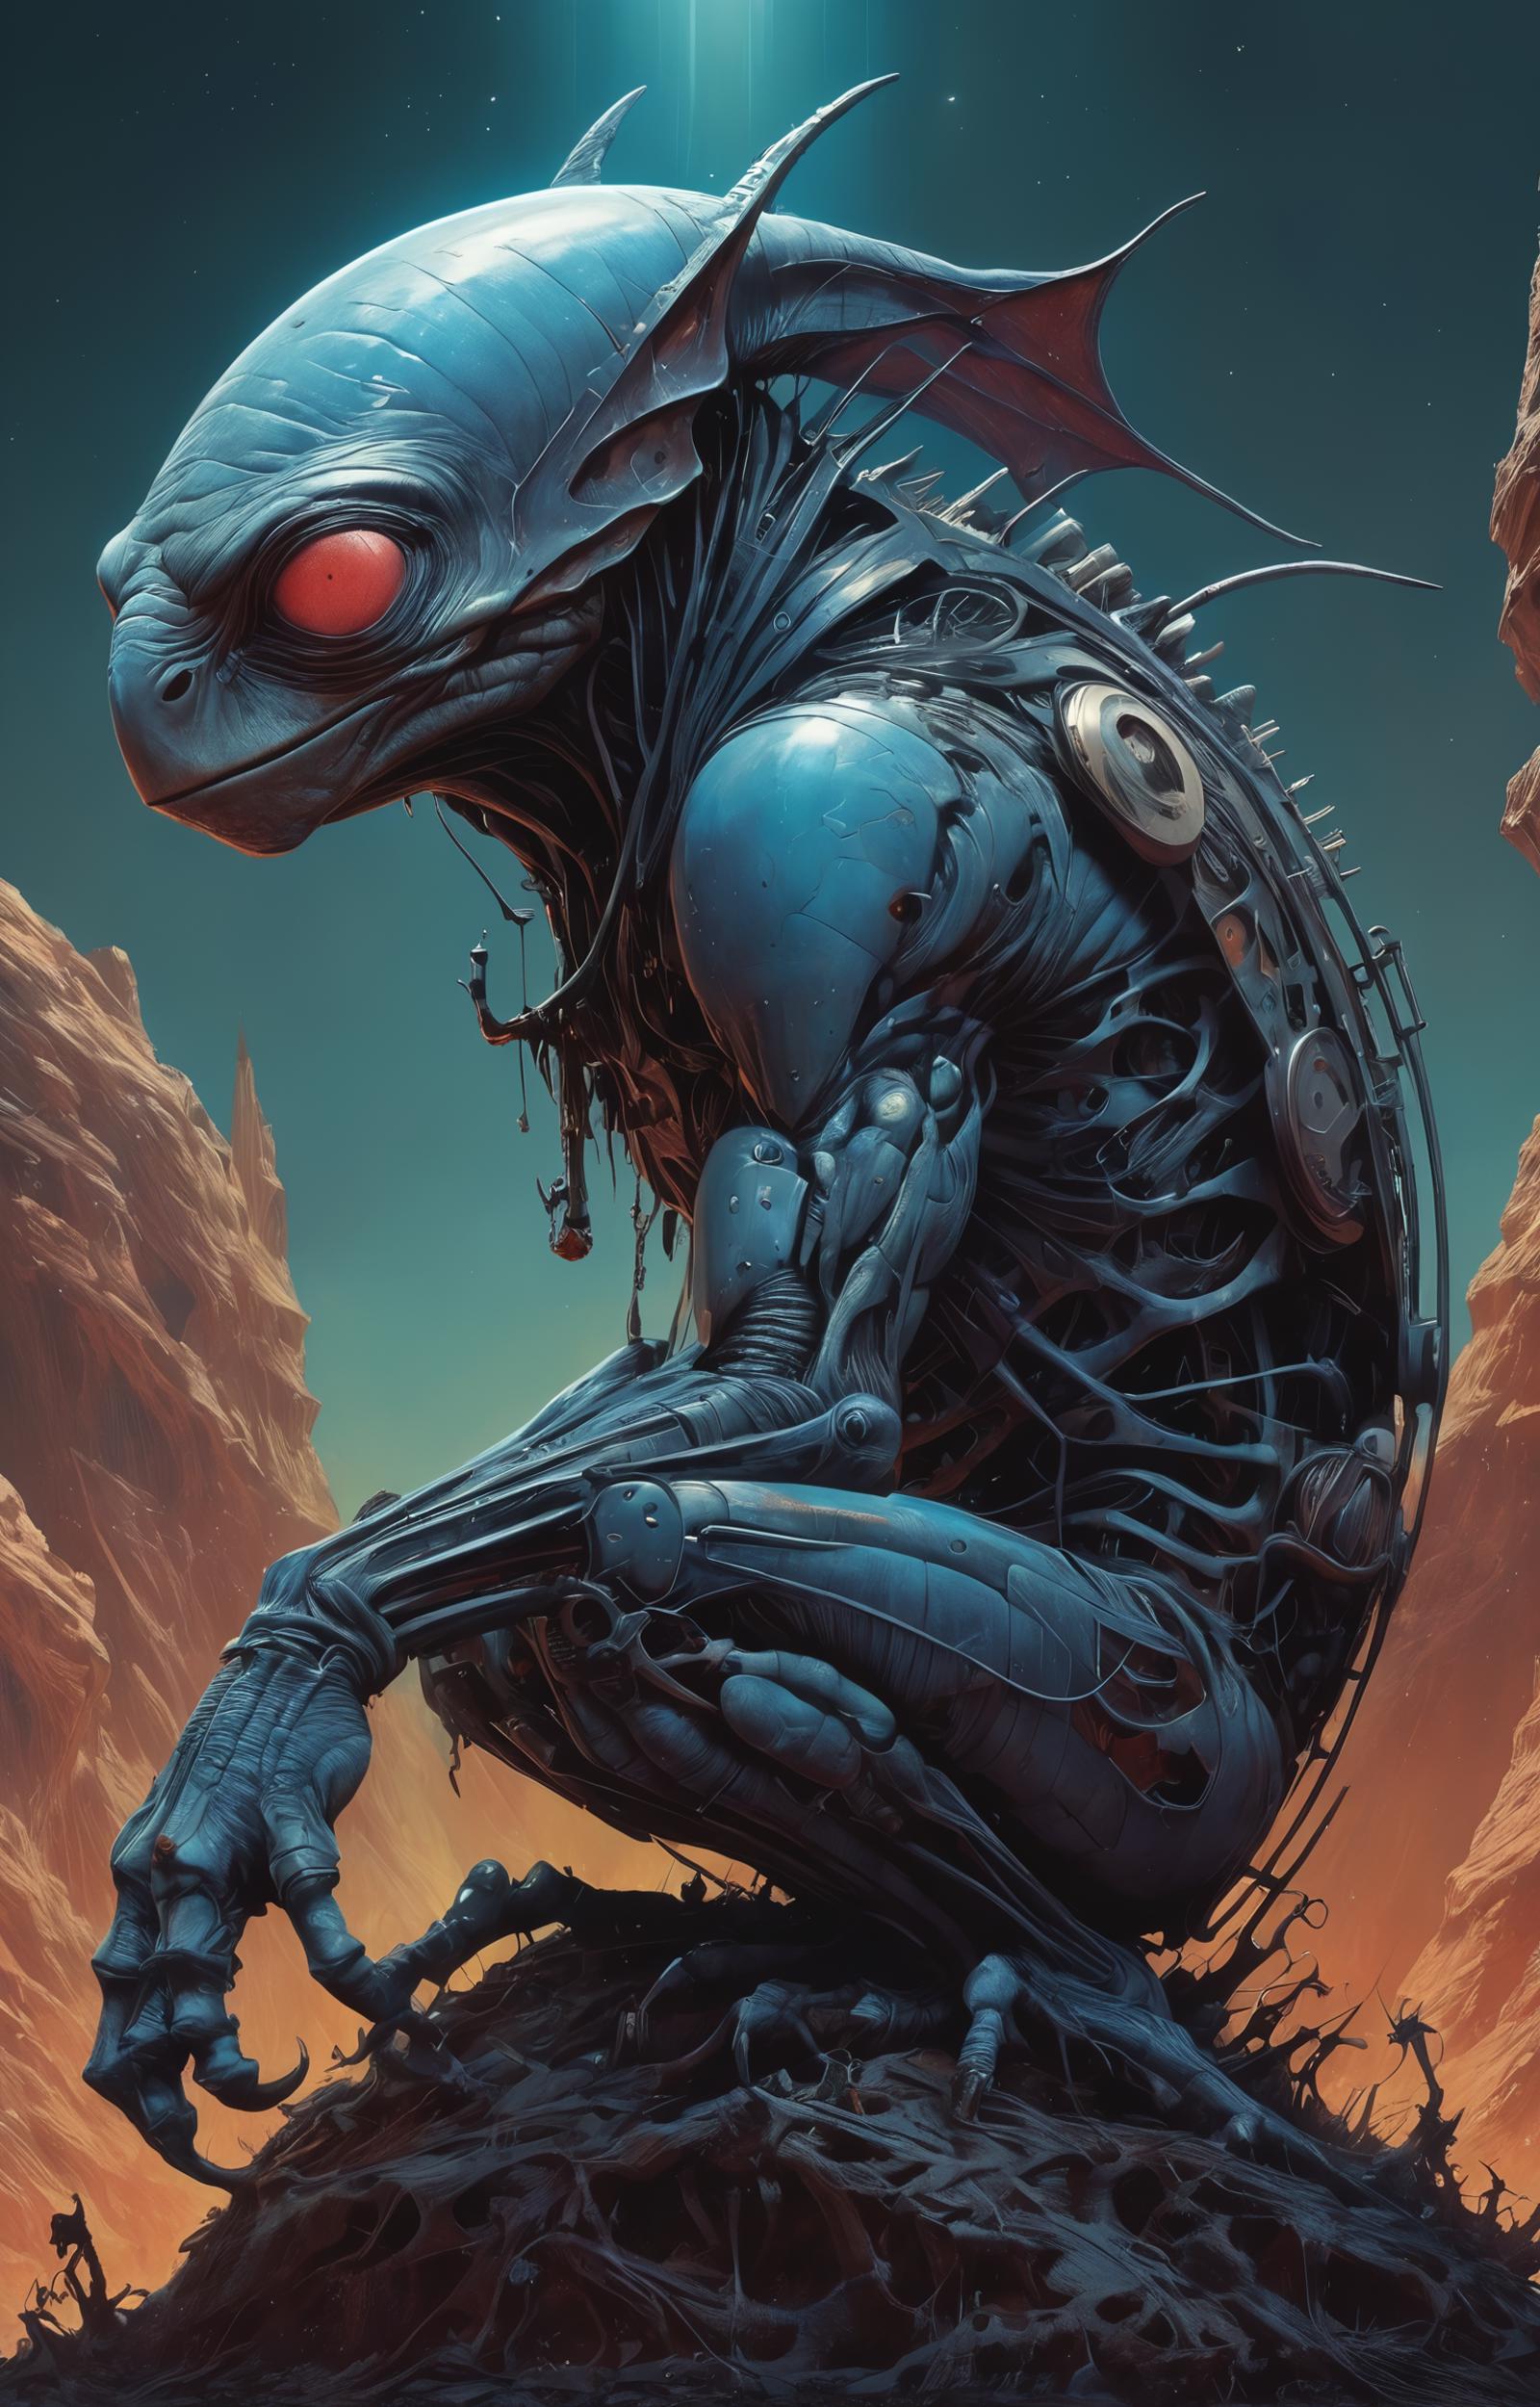 The image features a large robot with a blue body, sitting on rocks and having a red glow in its eyes. The robot is positioned with its legs crossed and appears to be intricately designed, possibly resembling a creature. The scene seems to be set in a space environment, with the robot being the central focus of the image.